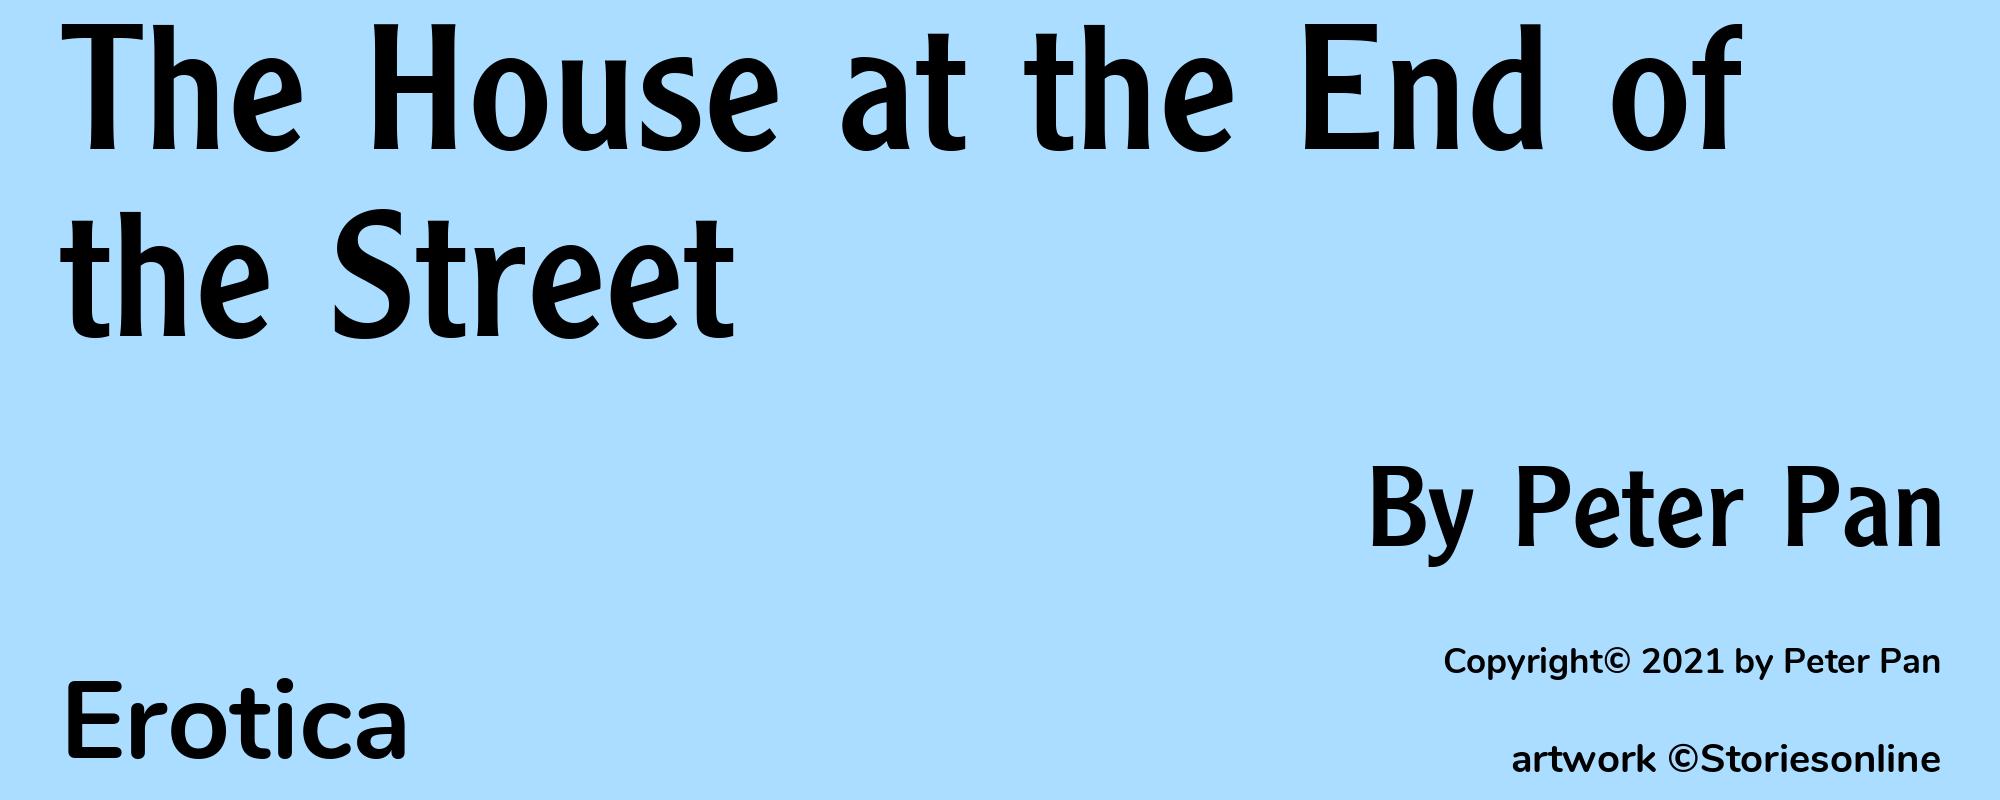 The House at the End of the Street - Cover